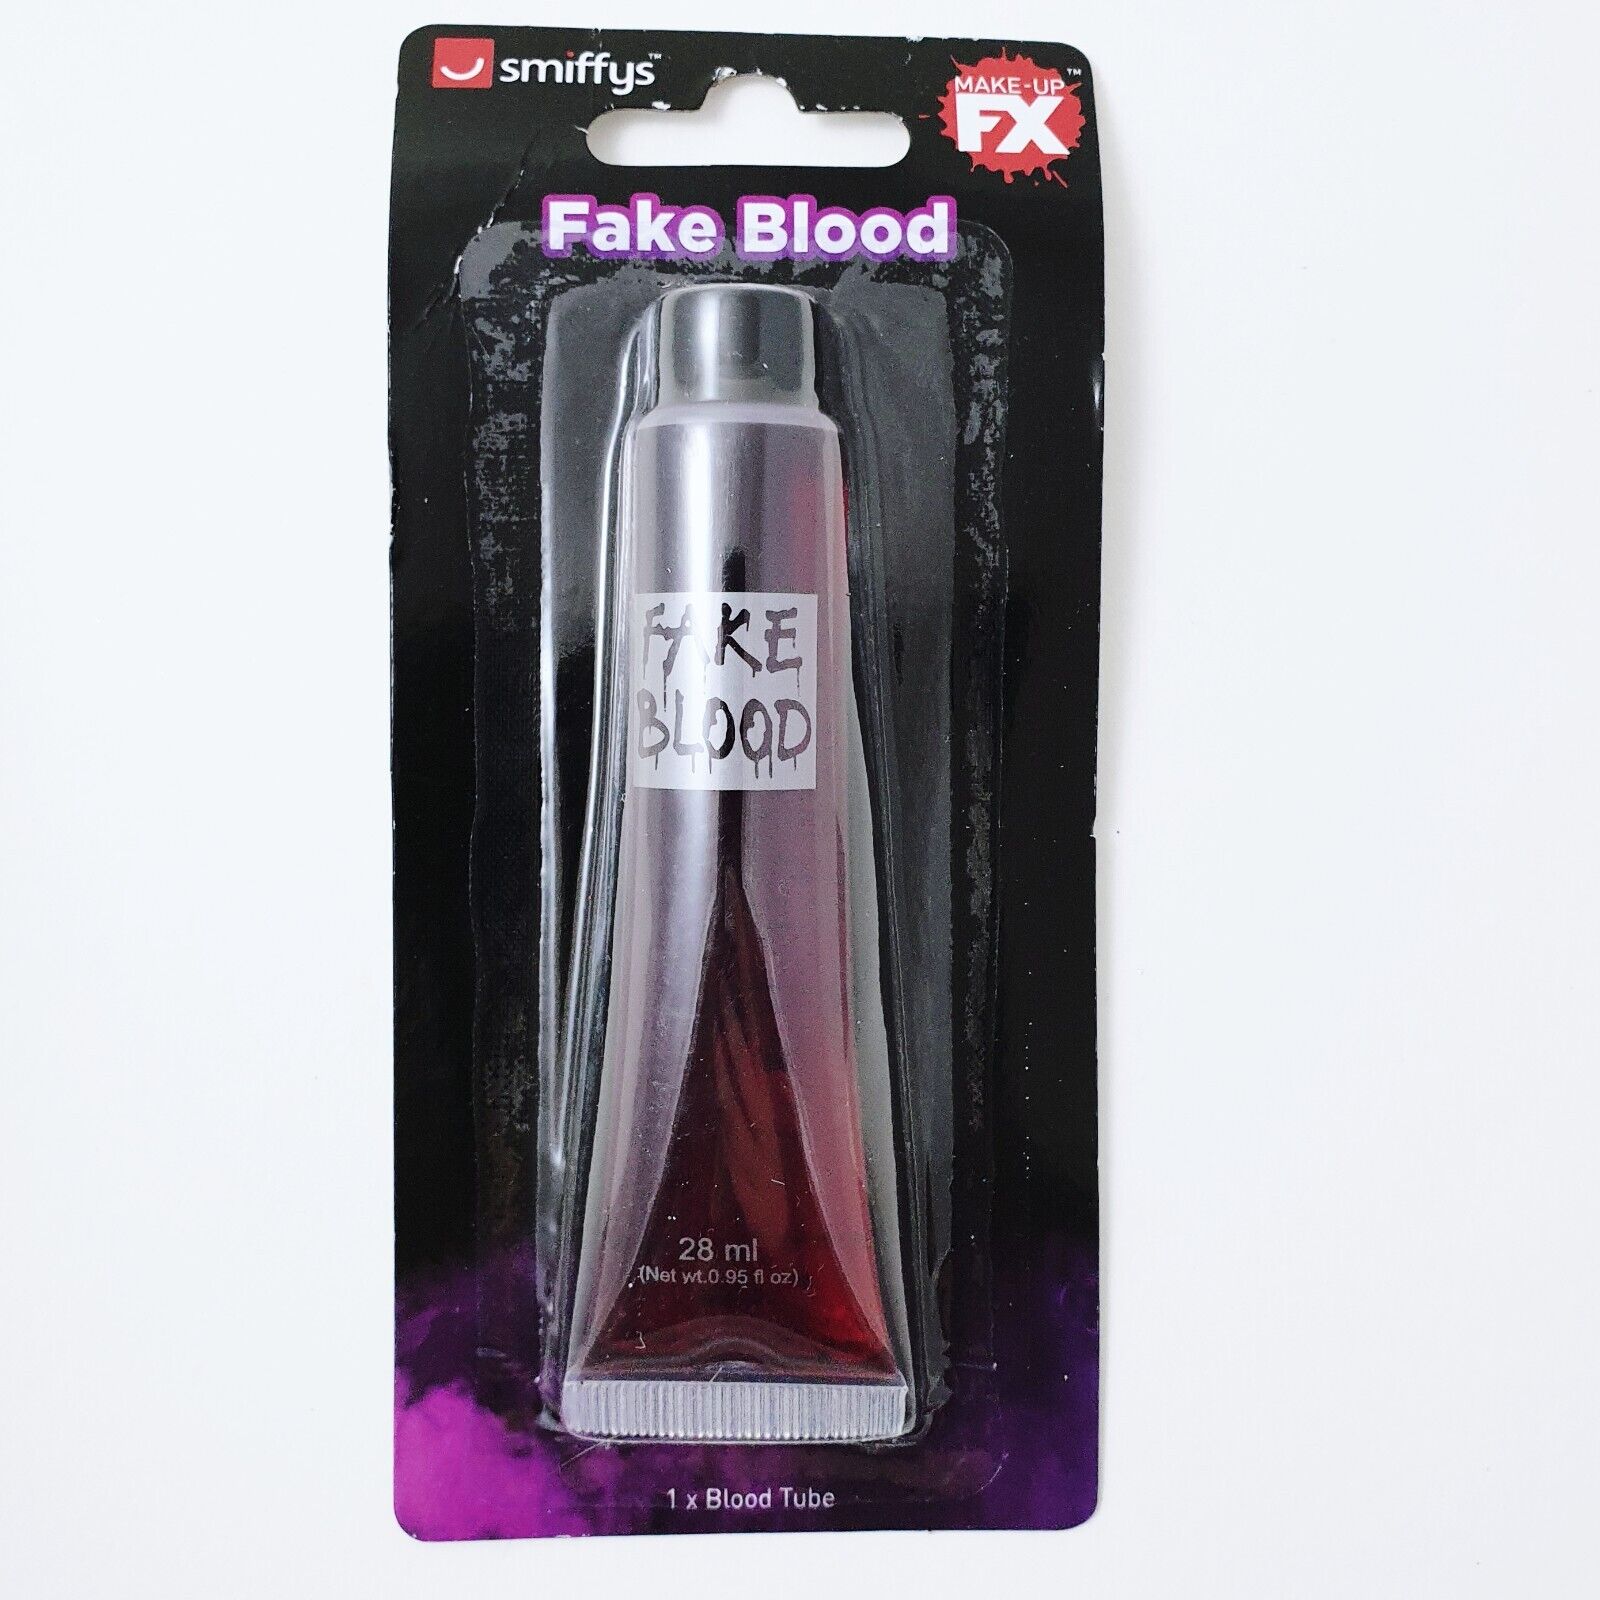 Smiffys Make-Up FX Fake Blood 28ml RRP 2 CLEARANCE XL 1.50